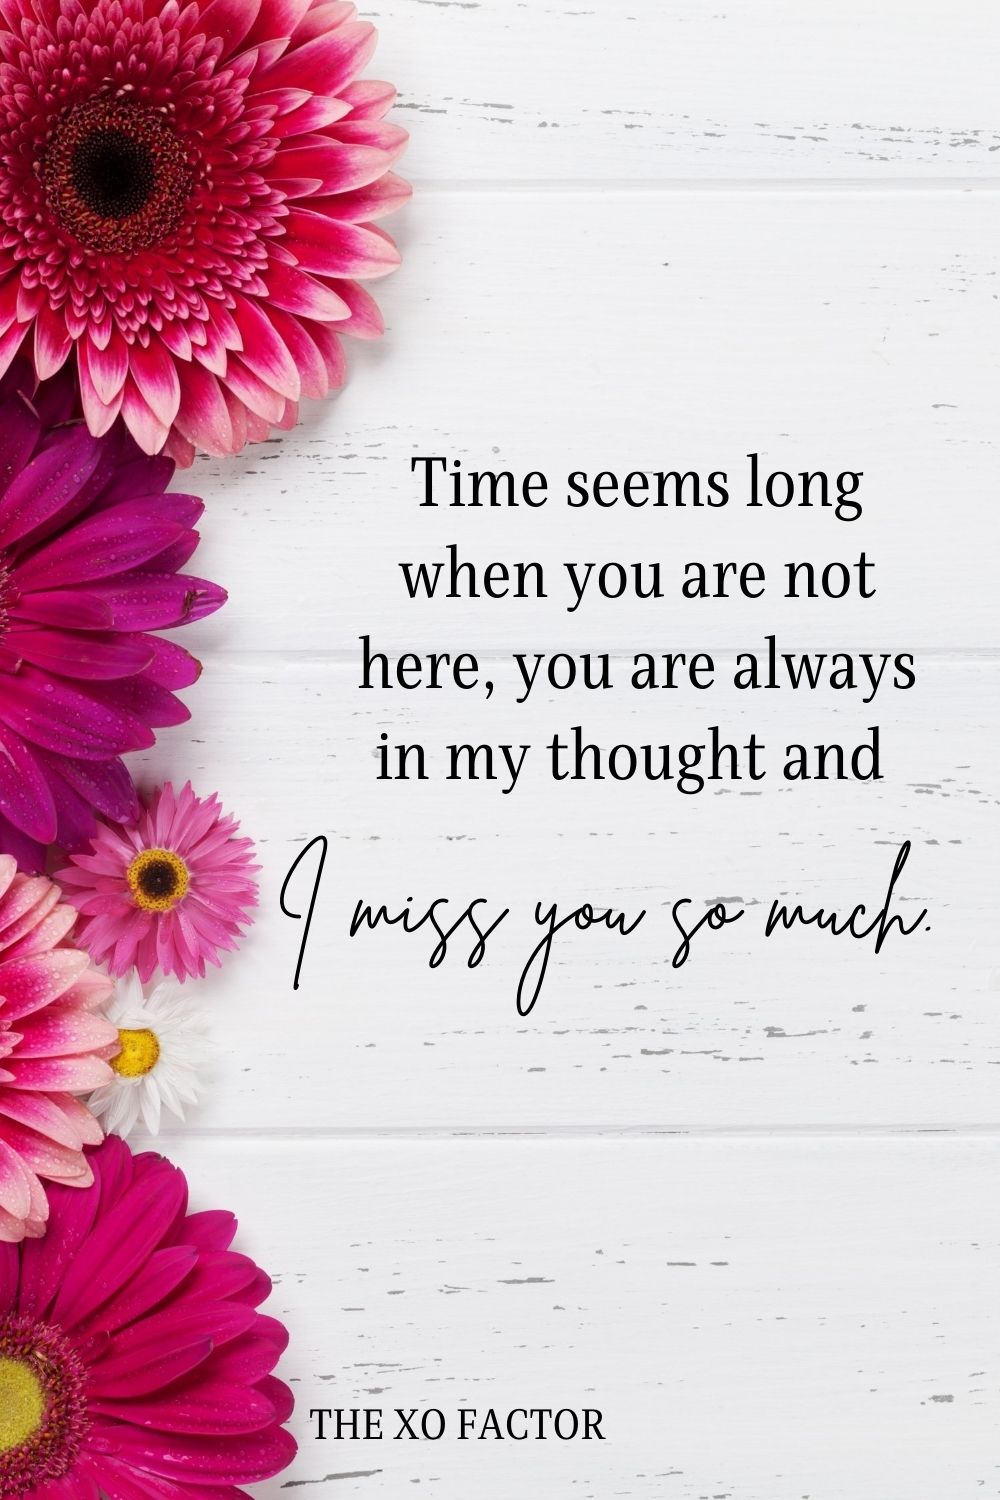 Time seems long when you are not here, you are always in my thought and I miss you so much.